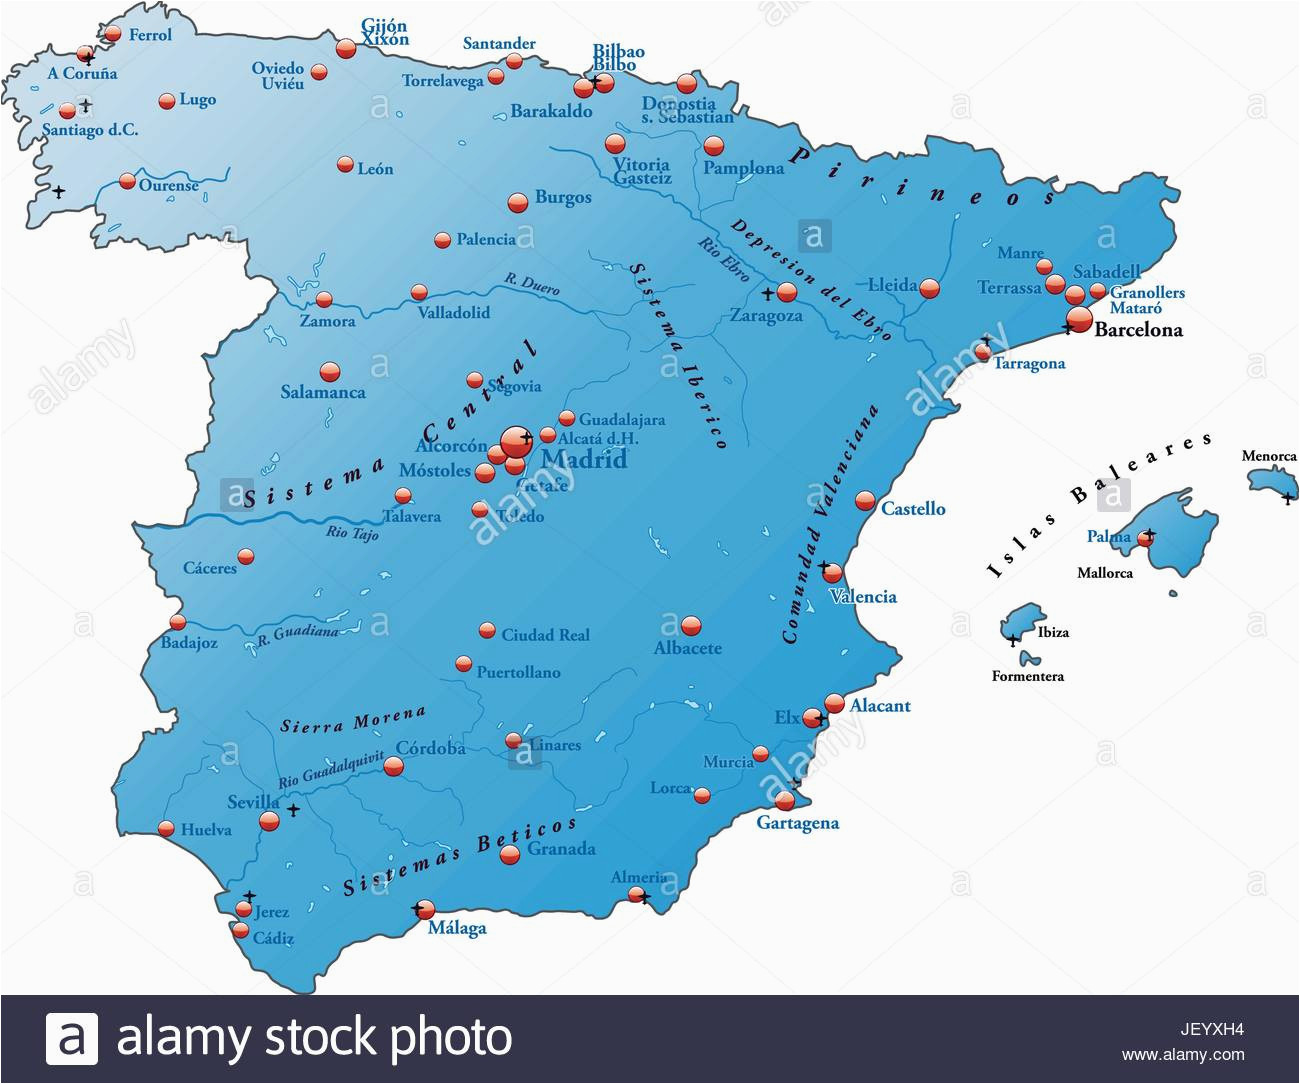 map od spain stock photos map od spain stock images alamy